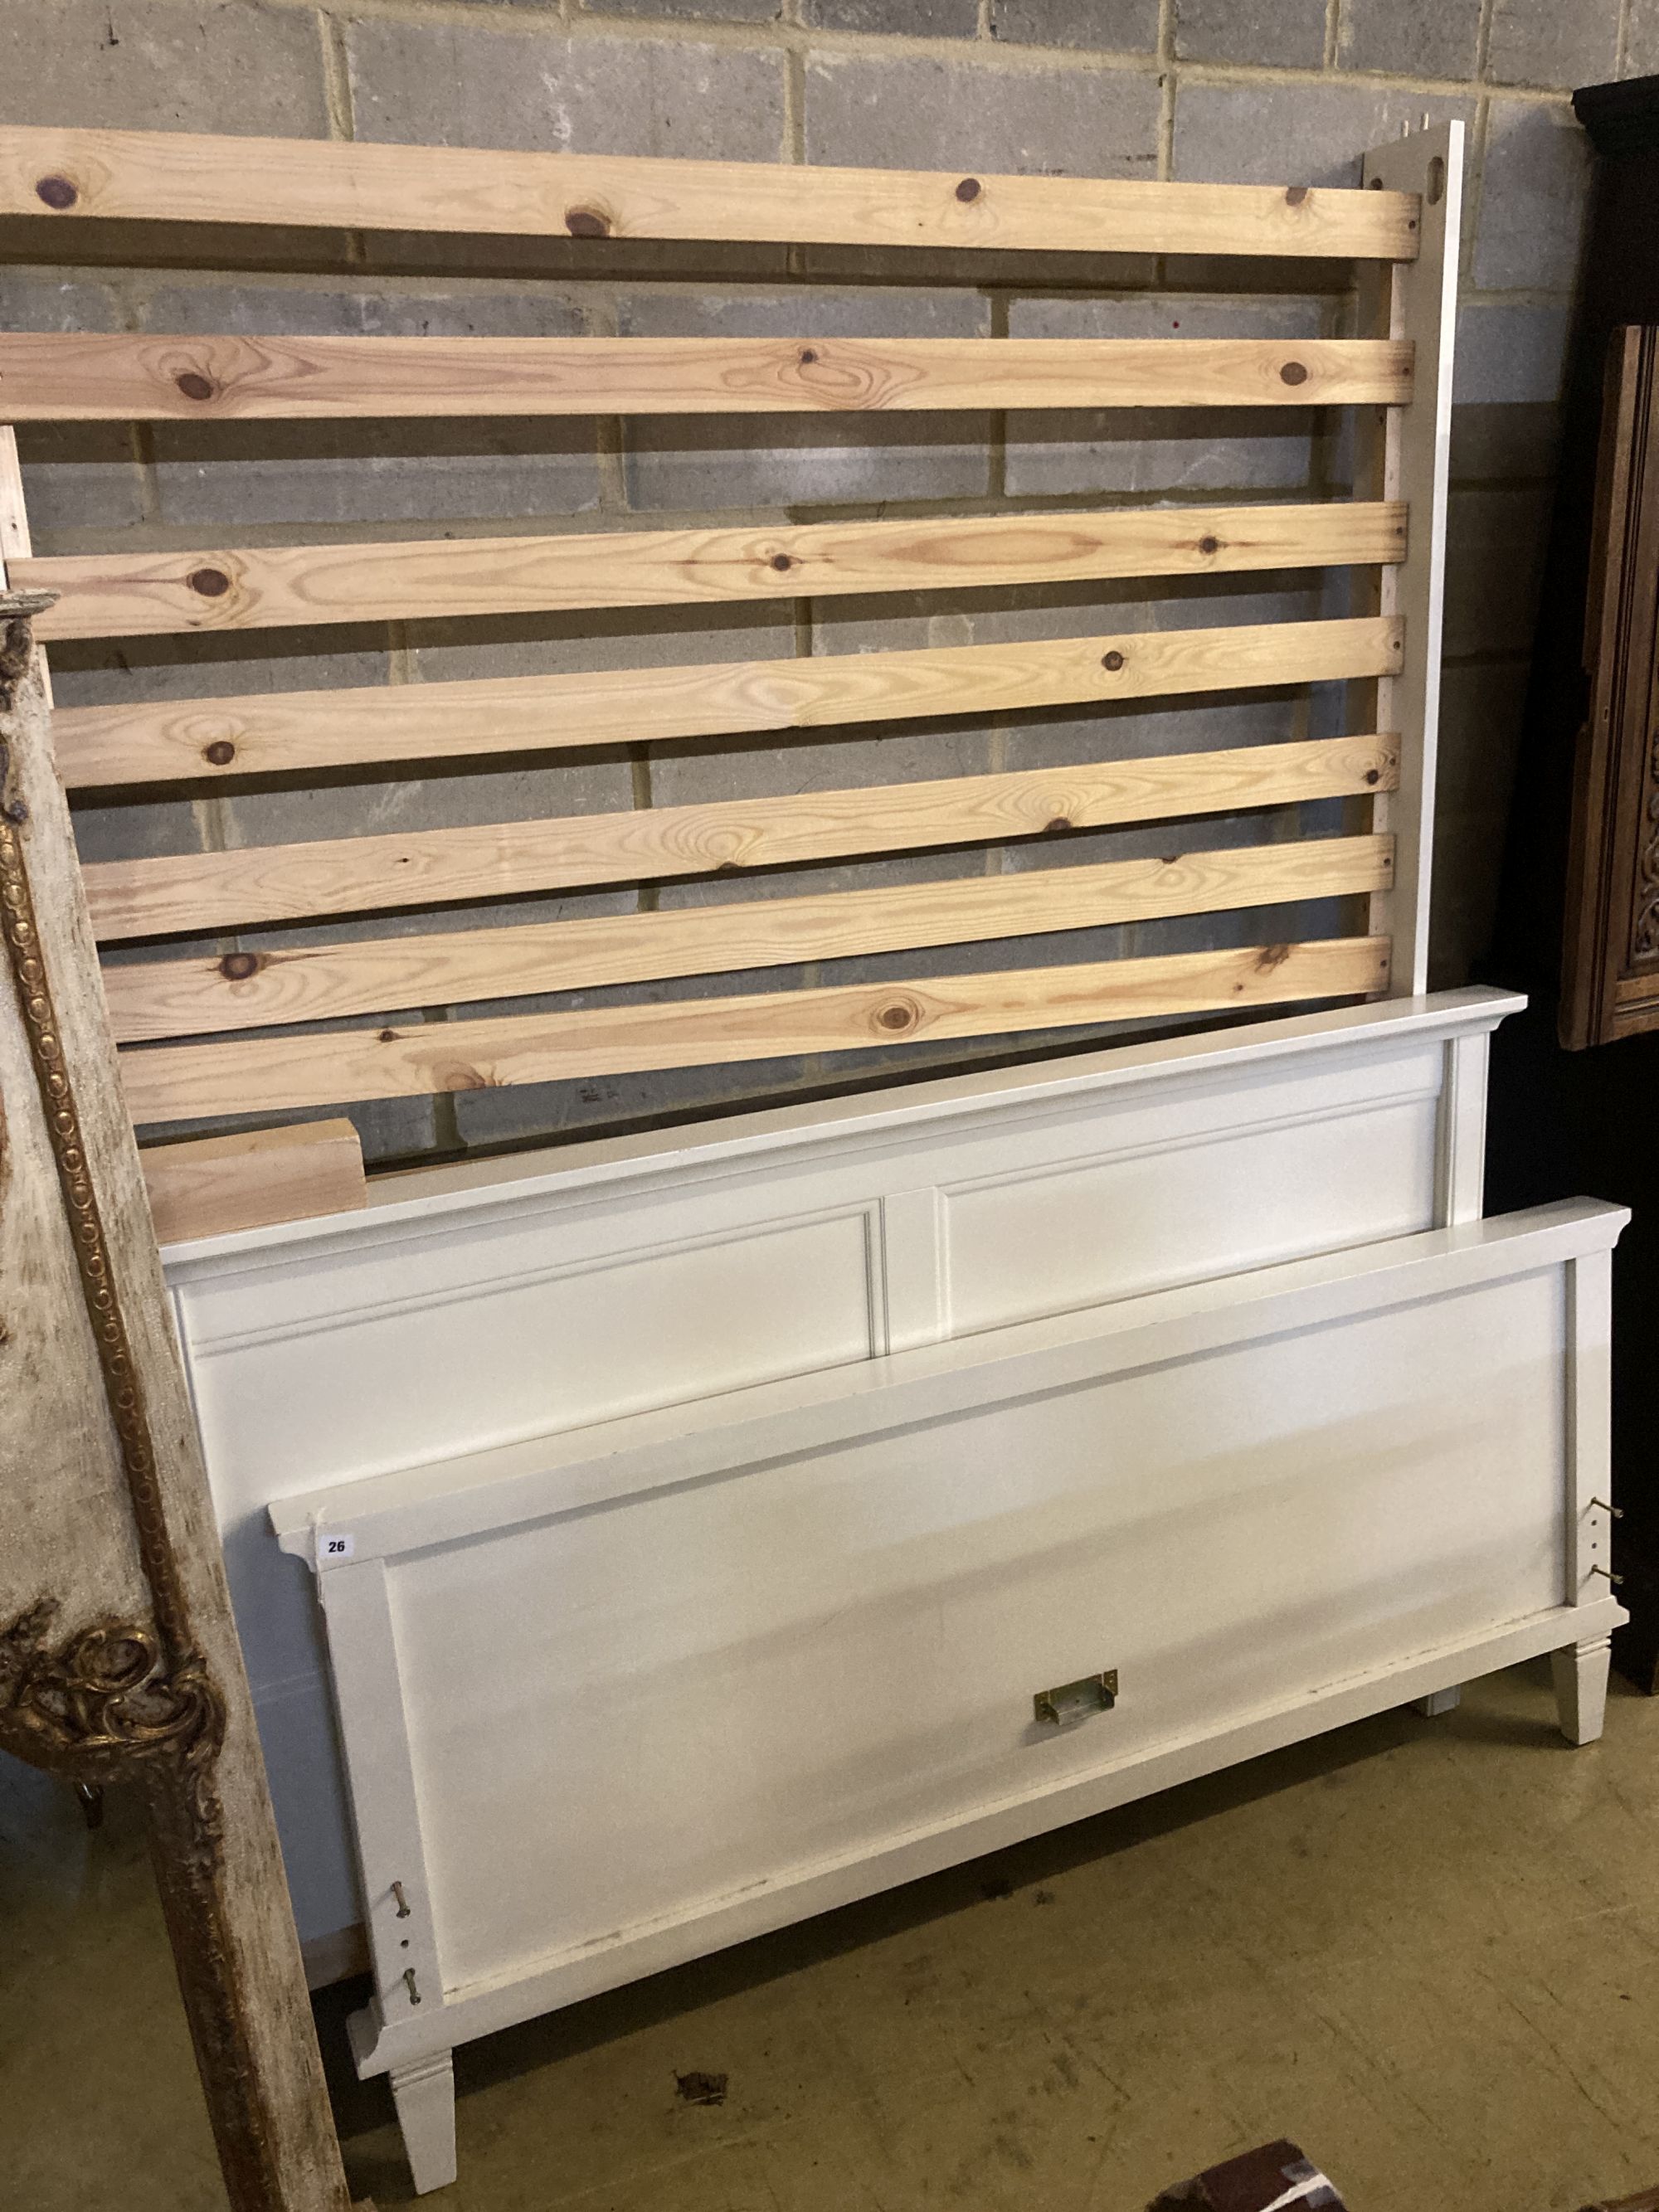 A contemporary white painted five foot bedframe, headboard height 102cm